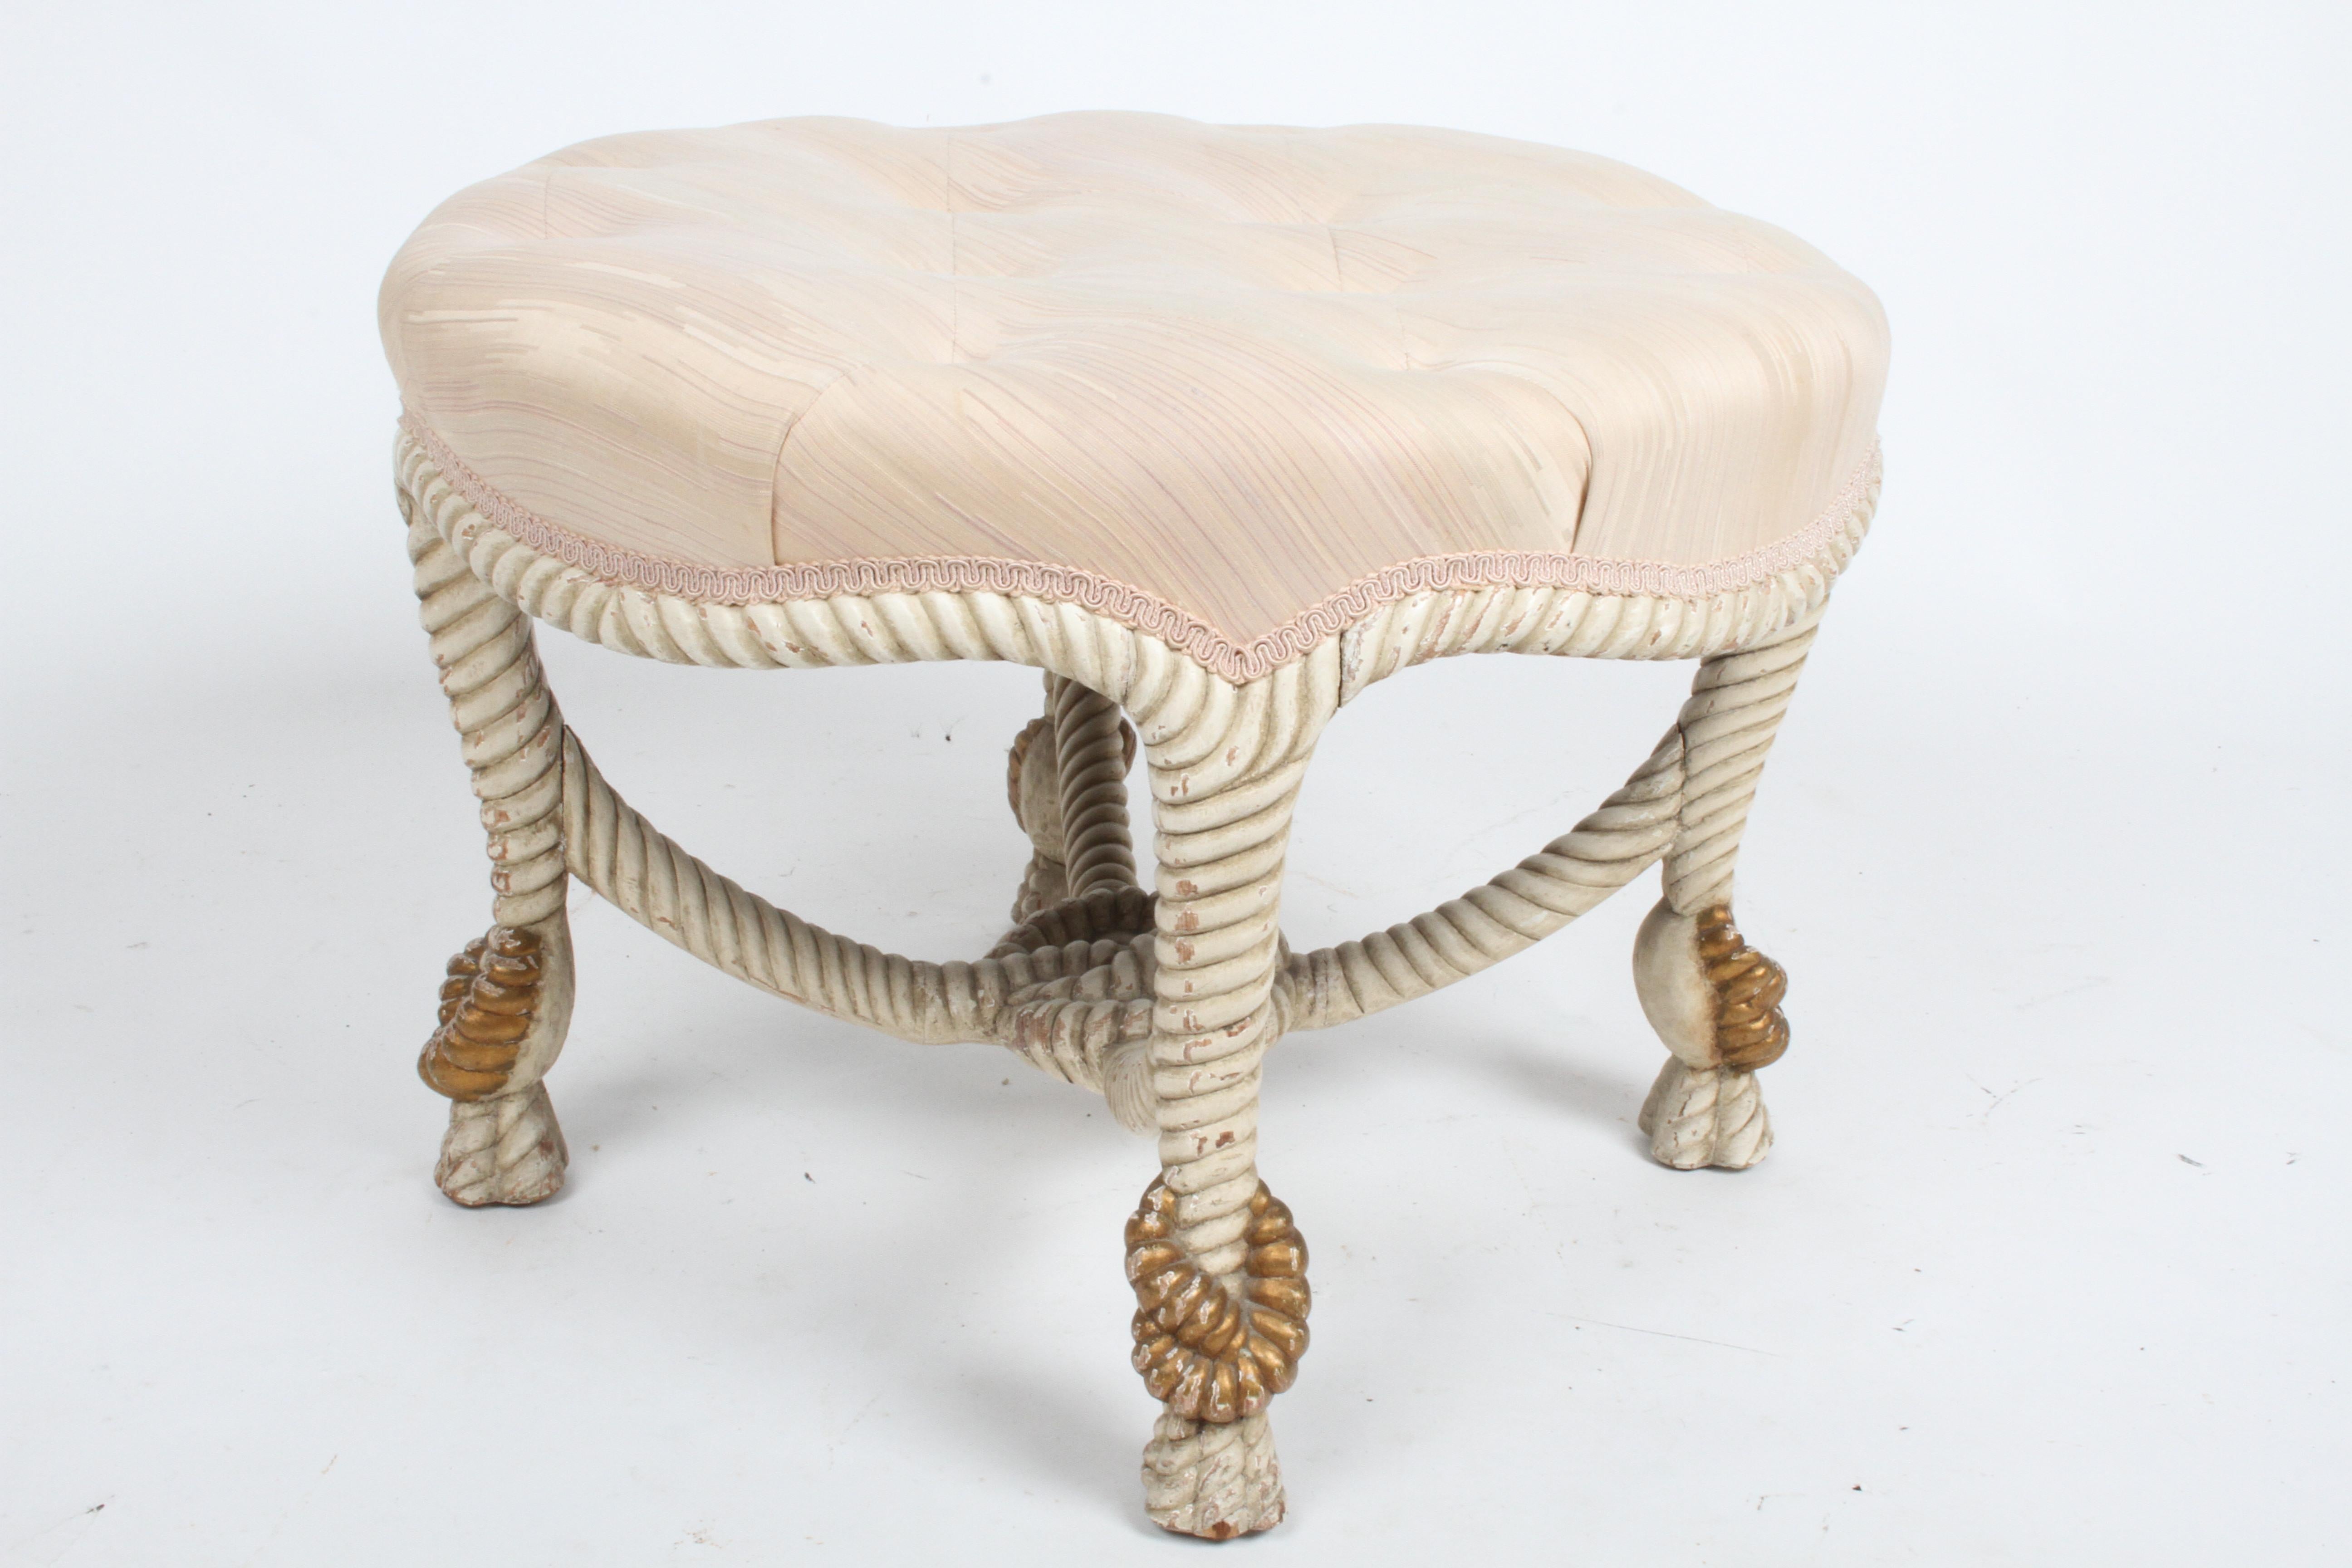 Vintage 40's Italian Cream & Gold Gilt Faux Rope Tassel Ottoman, Stool or Bench For Sale 5